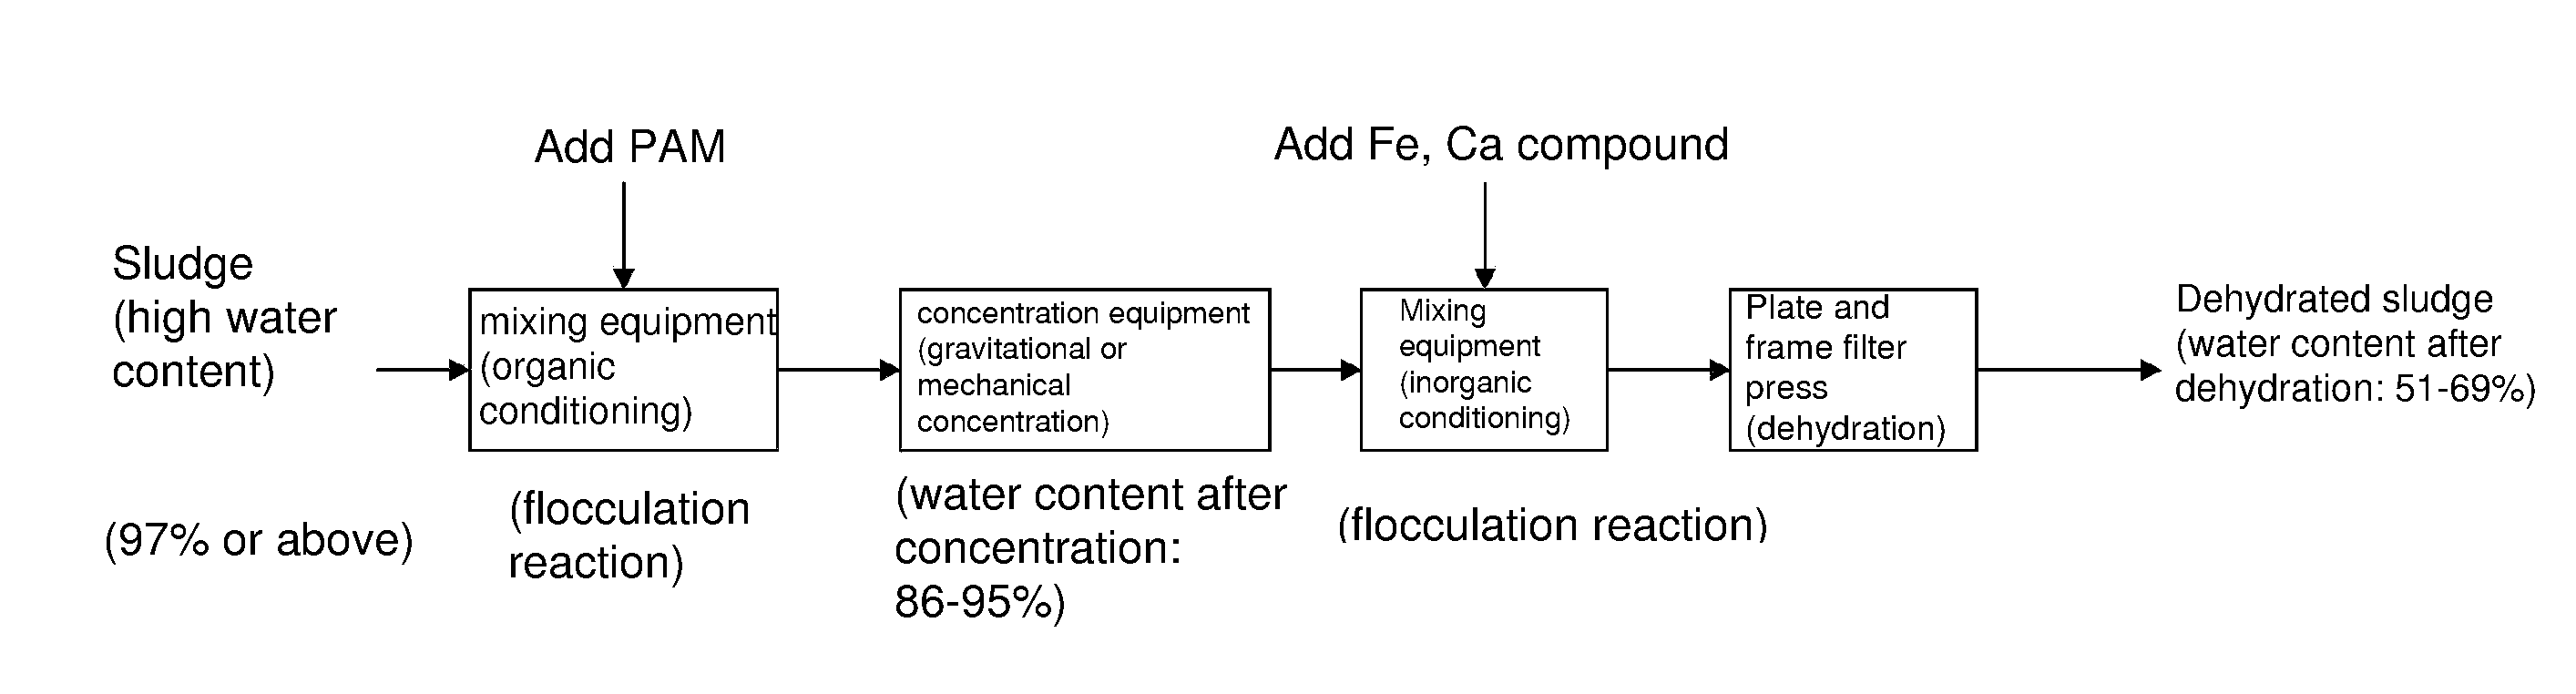 Sludge concentration and dehydration method